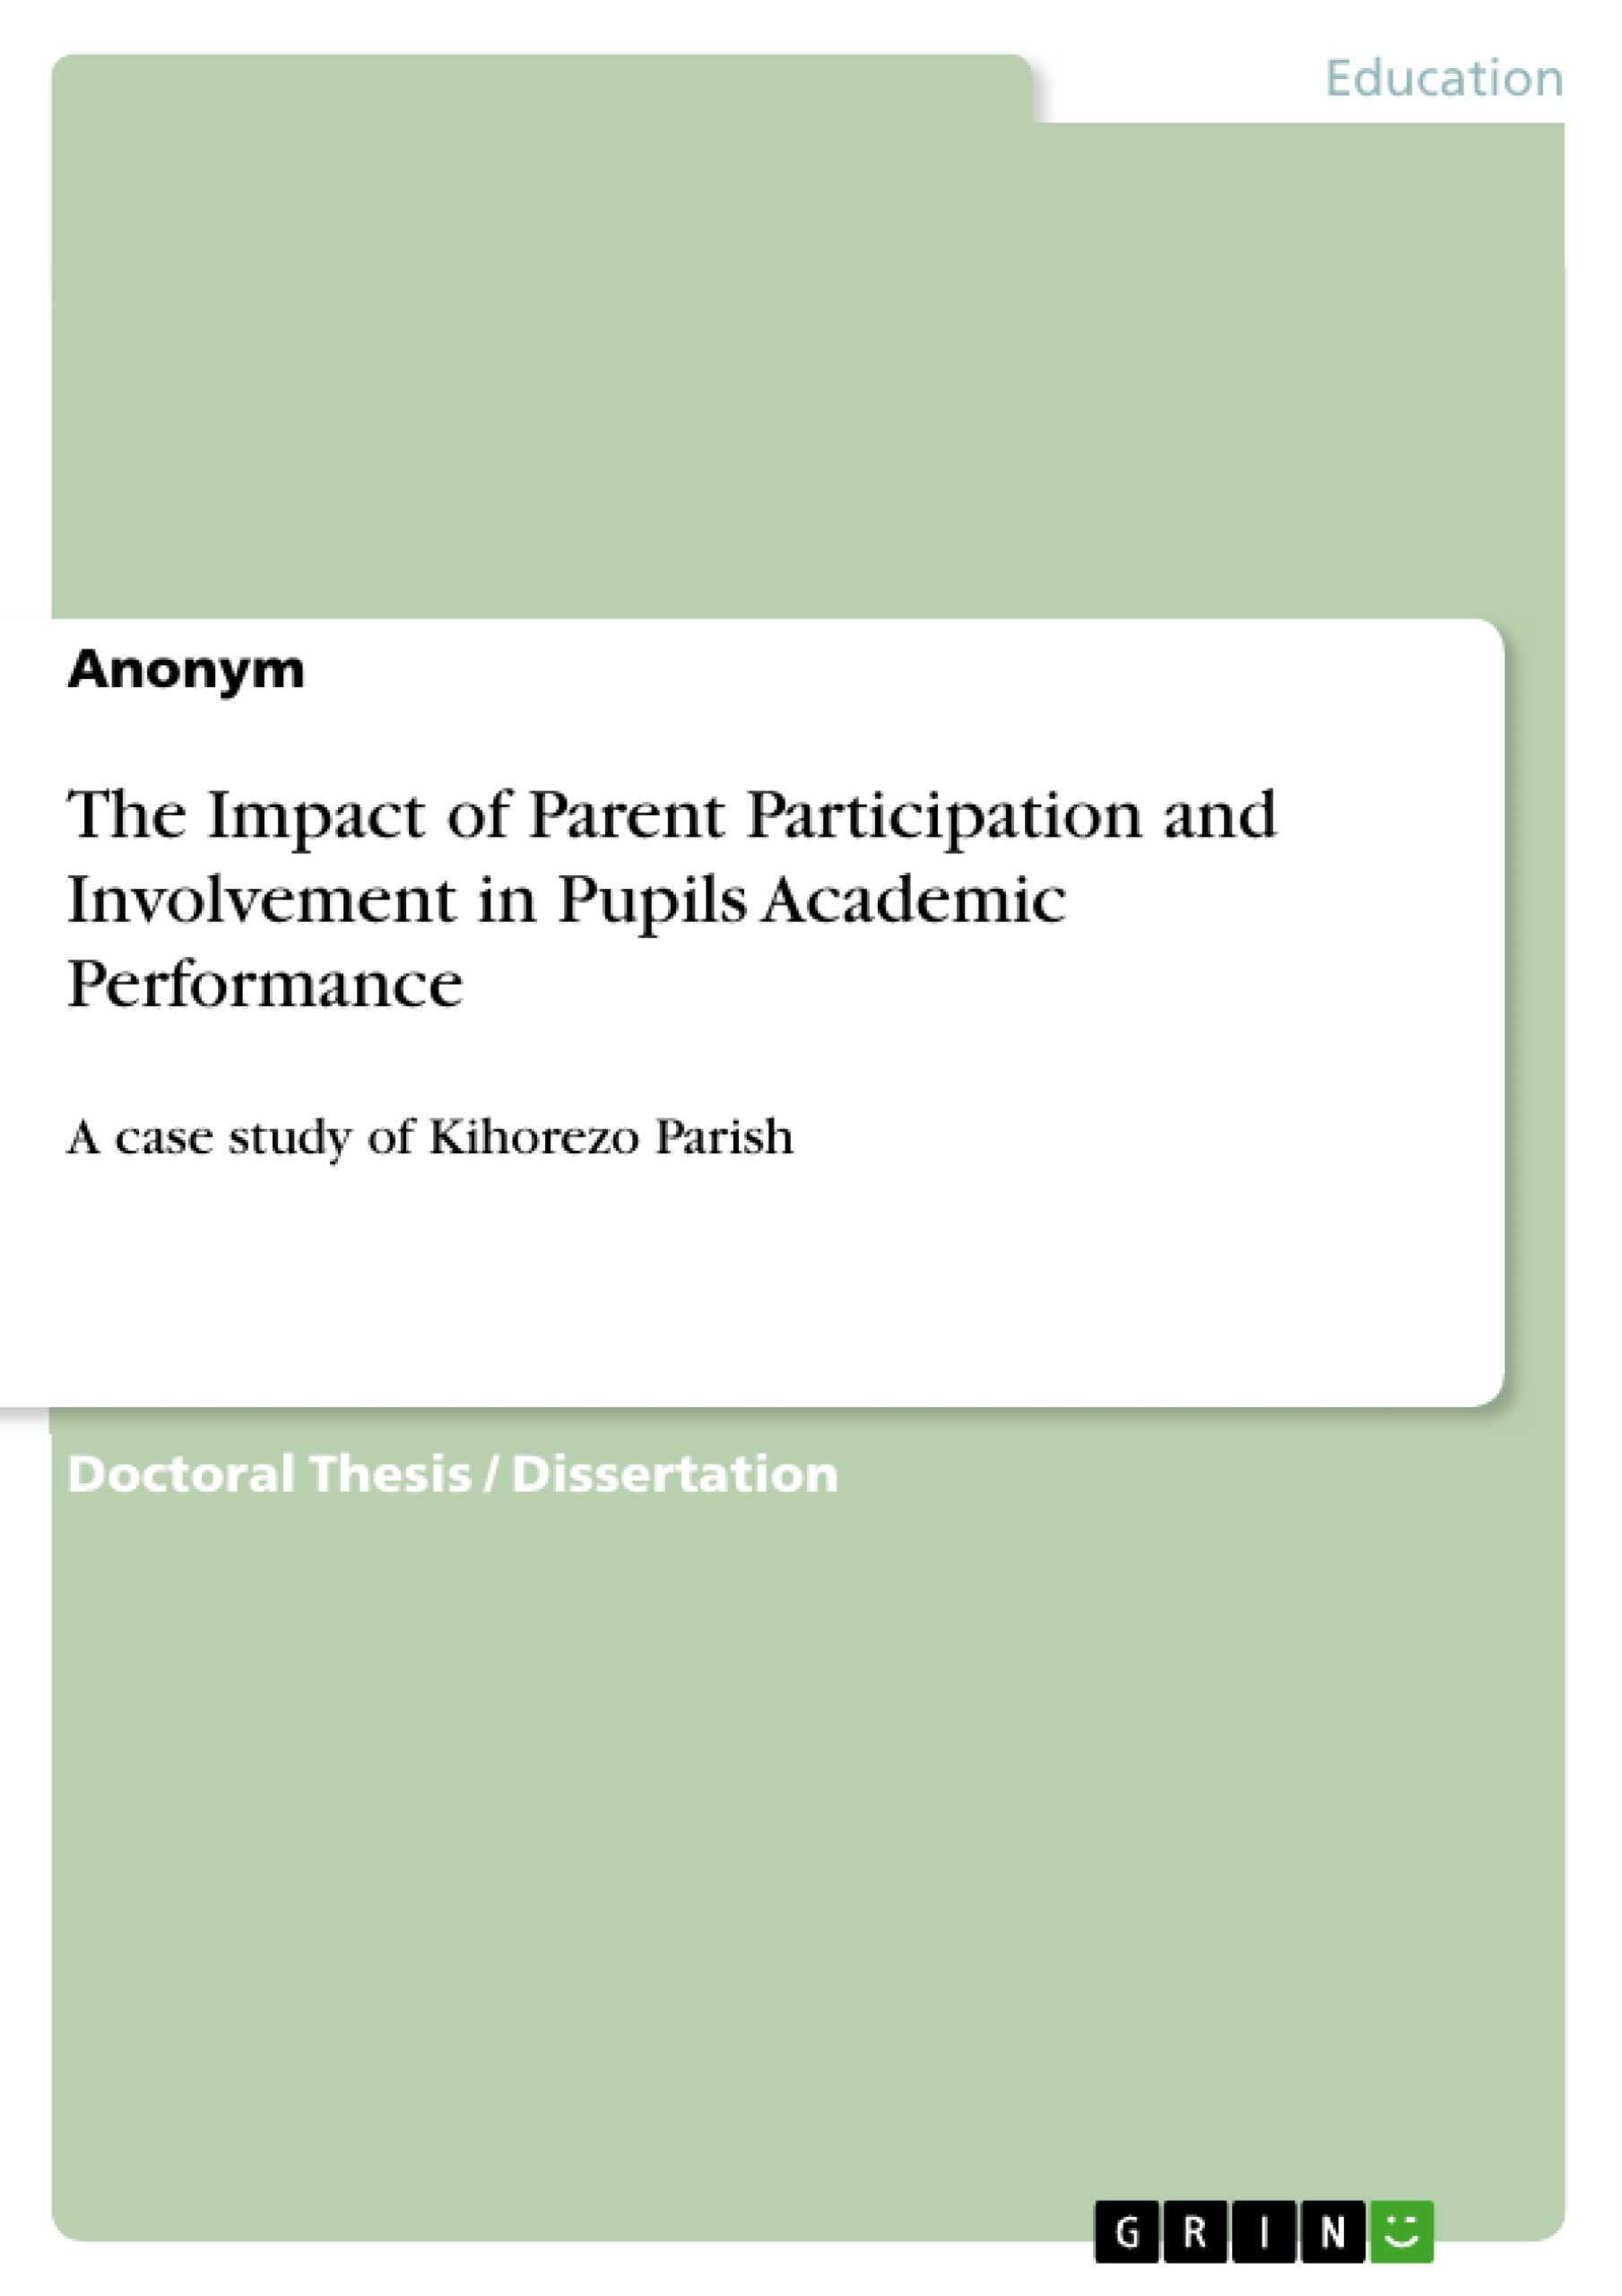 thesis on parental involvement and student achievement